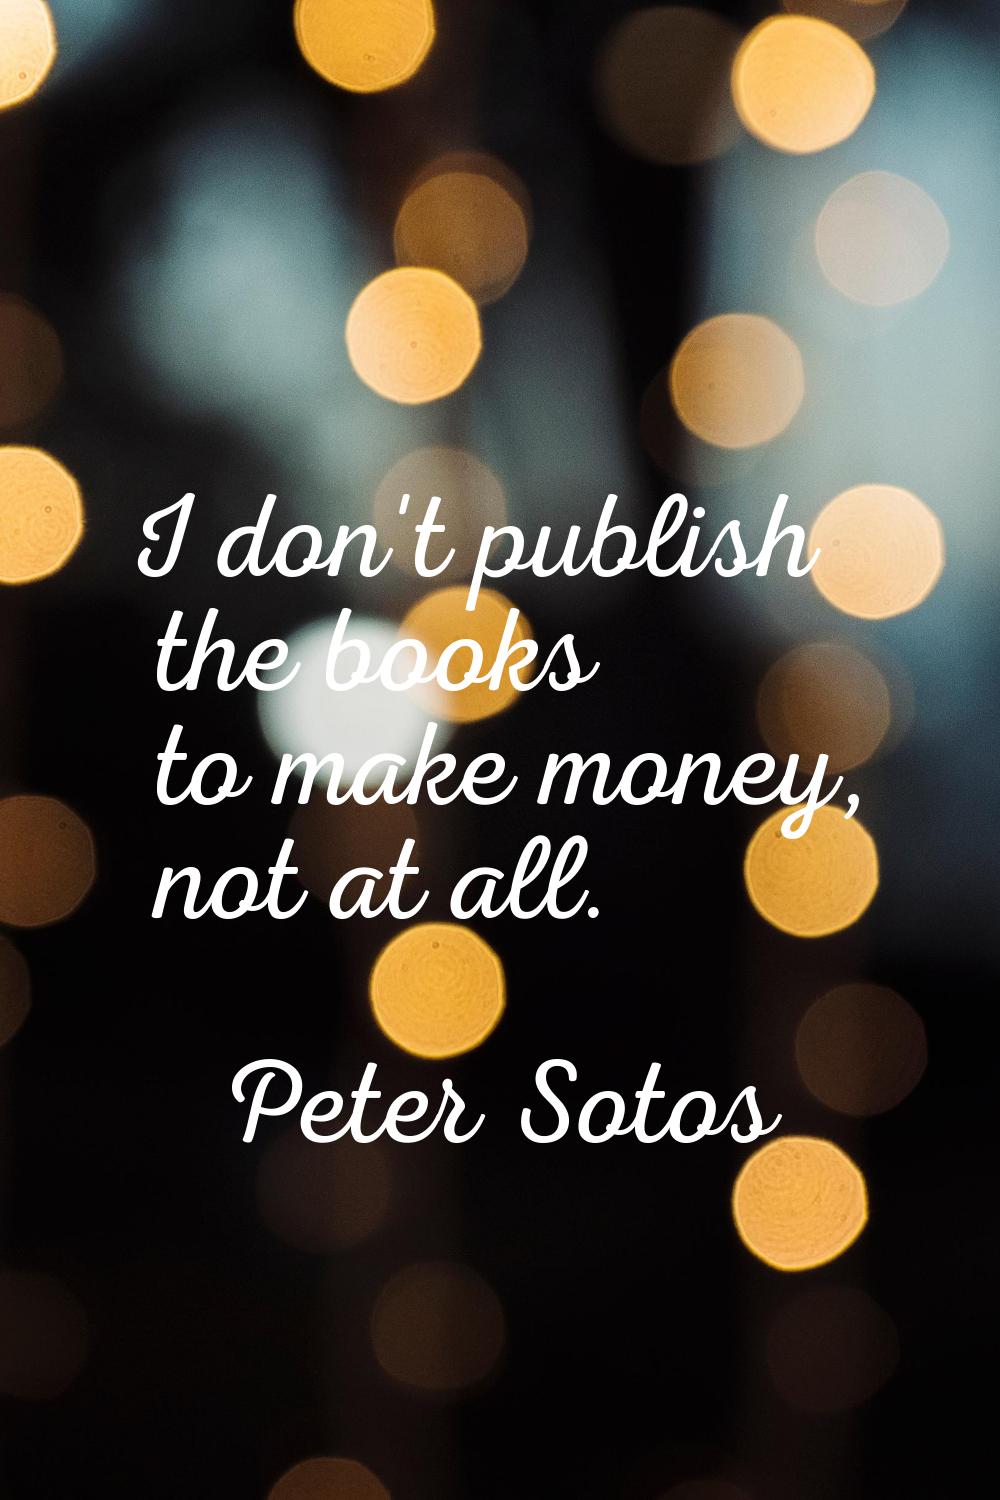 I don't publish the books to make money, not at all.